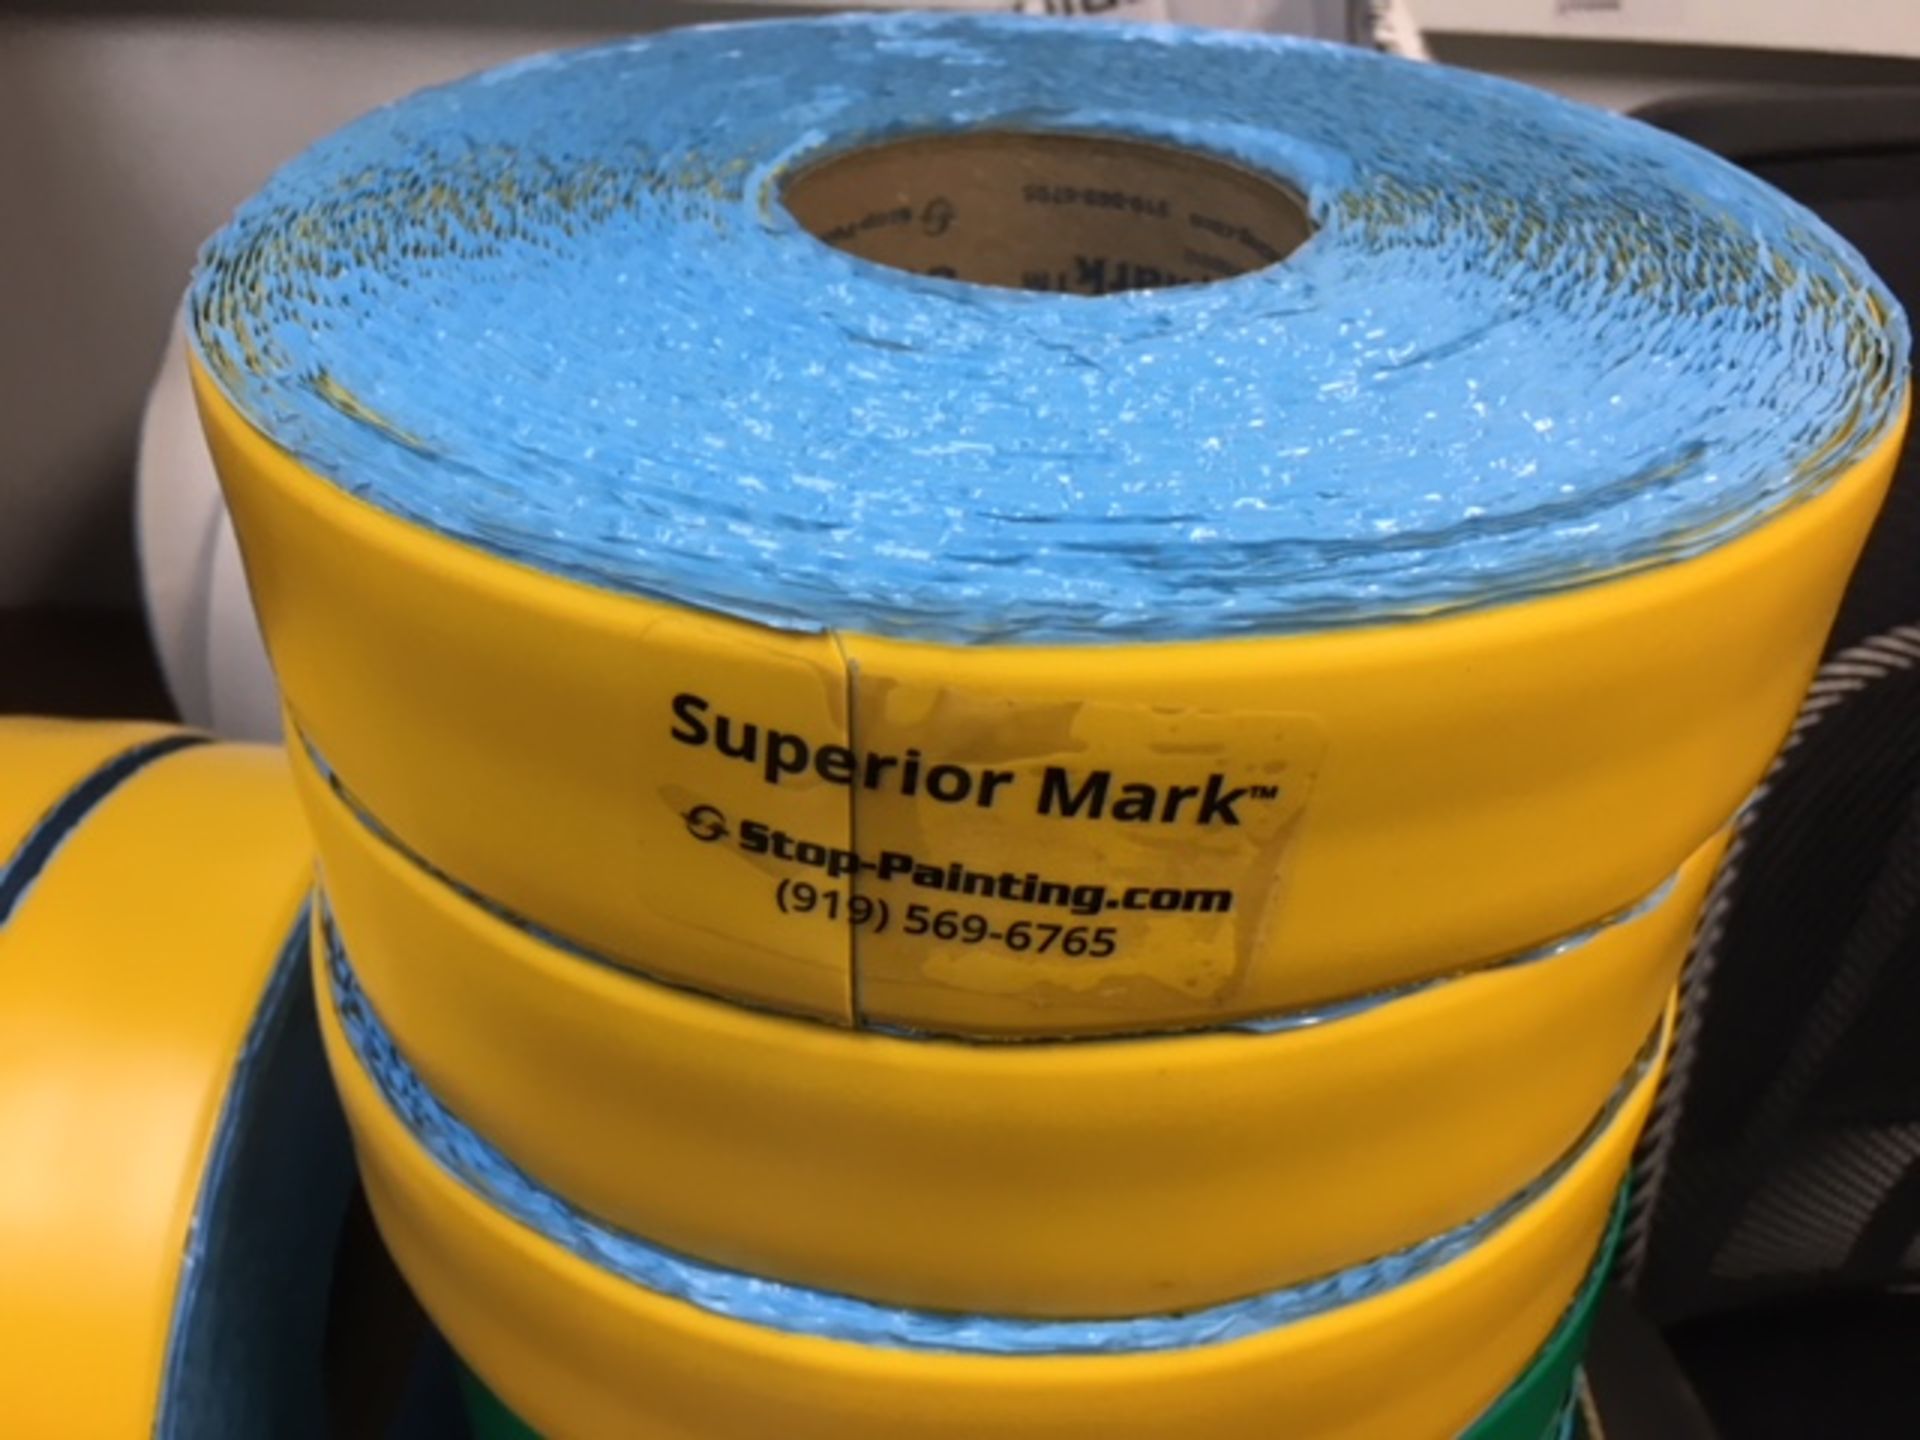 SUPERIOR-MARK "STOP PAINTING" SELF-ADHERING PLASTIC FLOOR SAFETY STRIPPING - Image 2 of 3